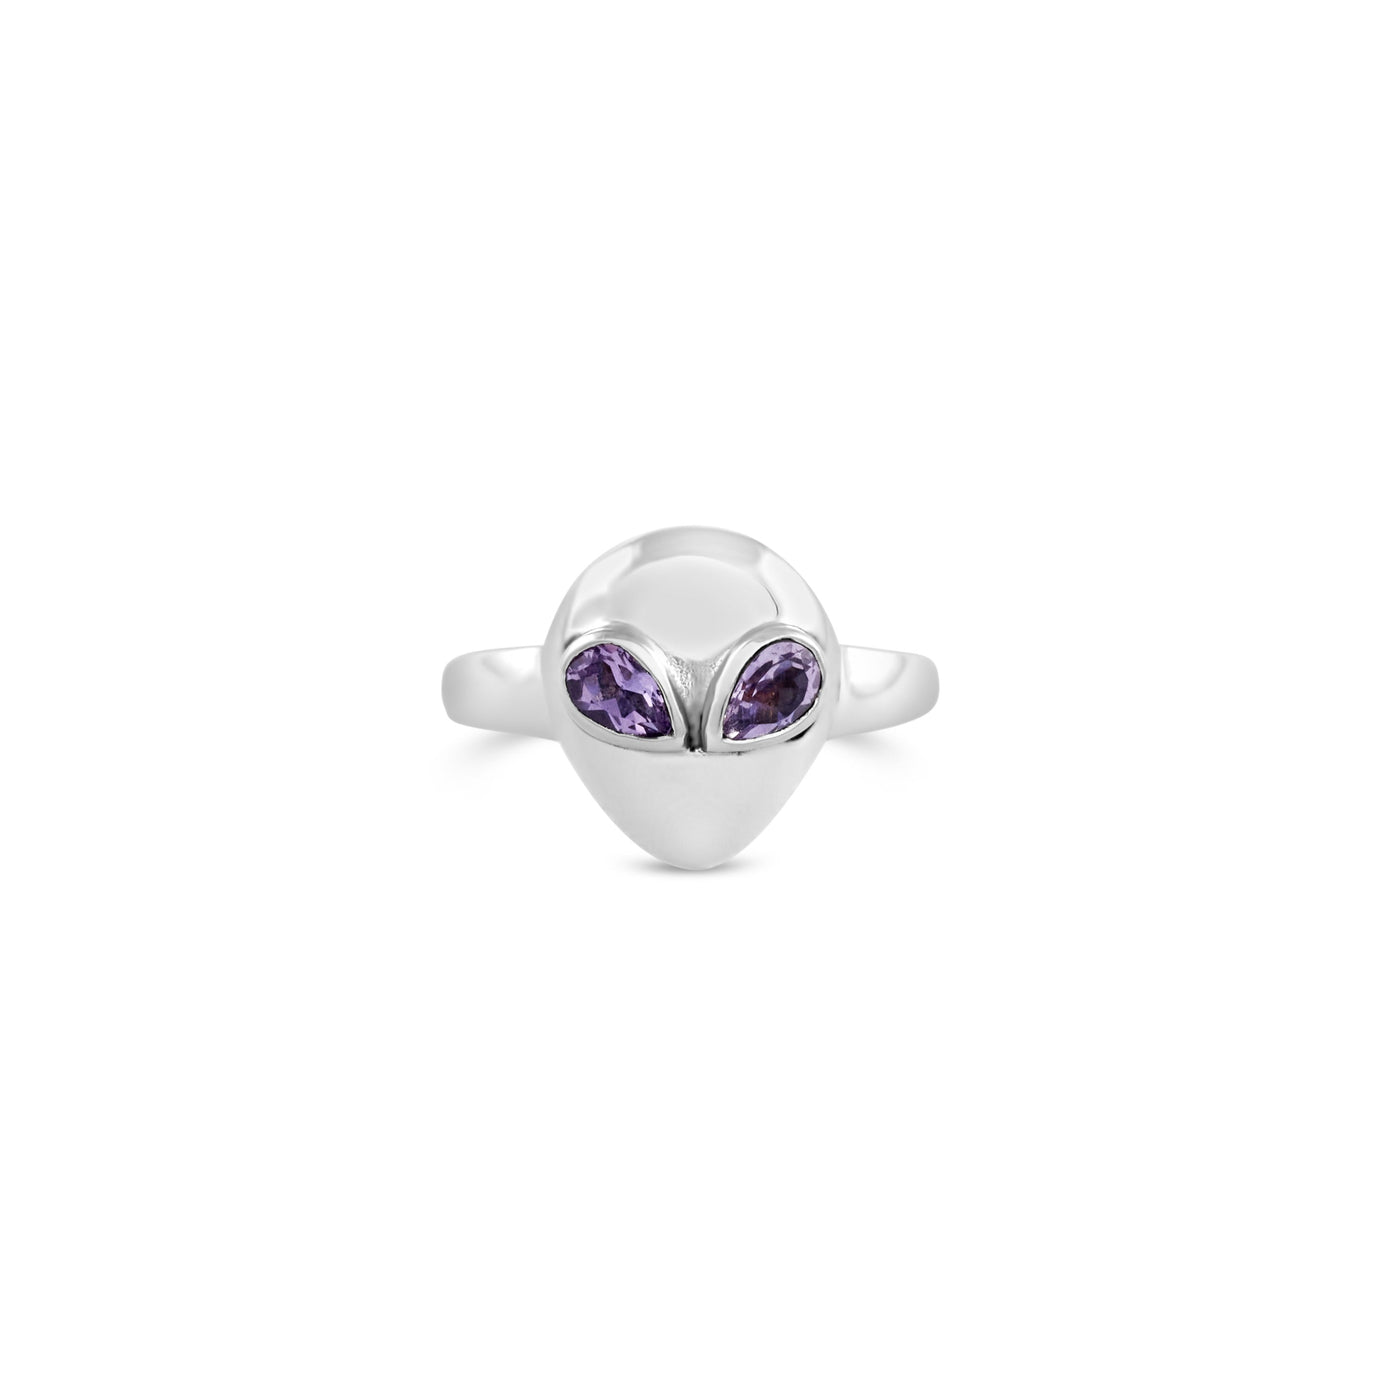 I Come In Peace Gemstone Alien Ring - Amethyst